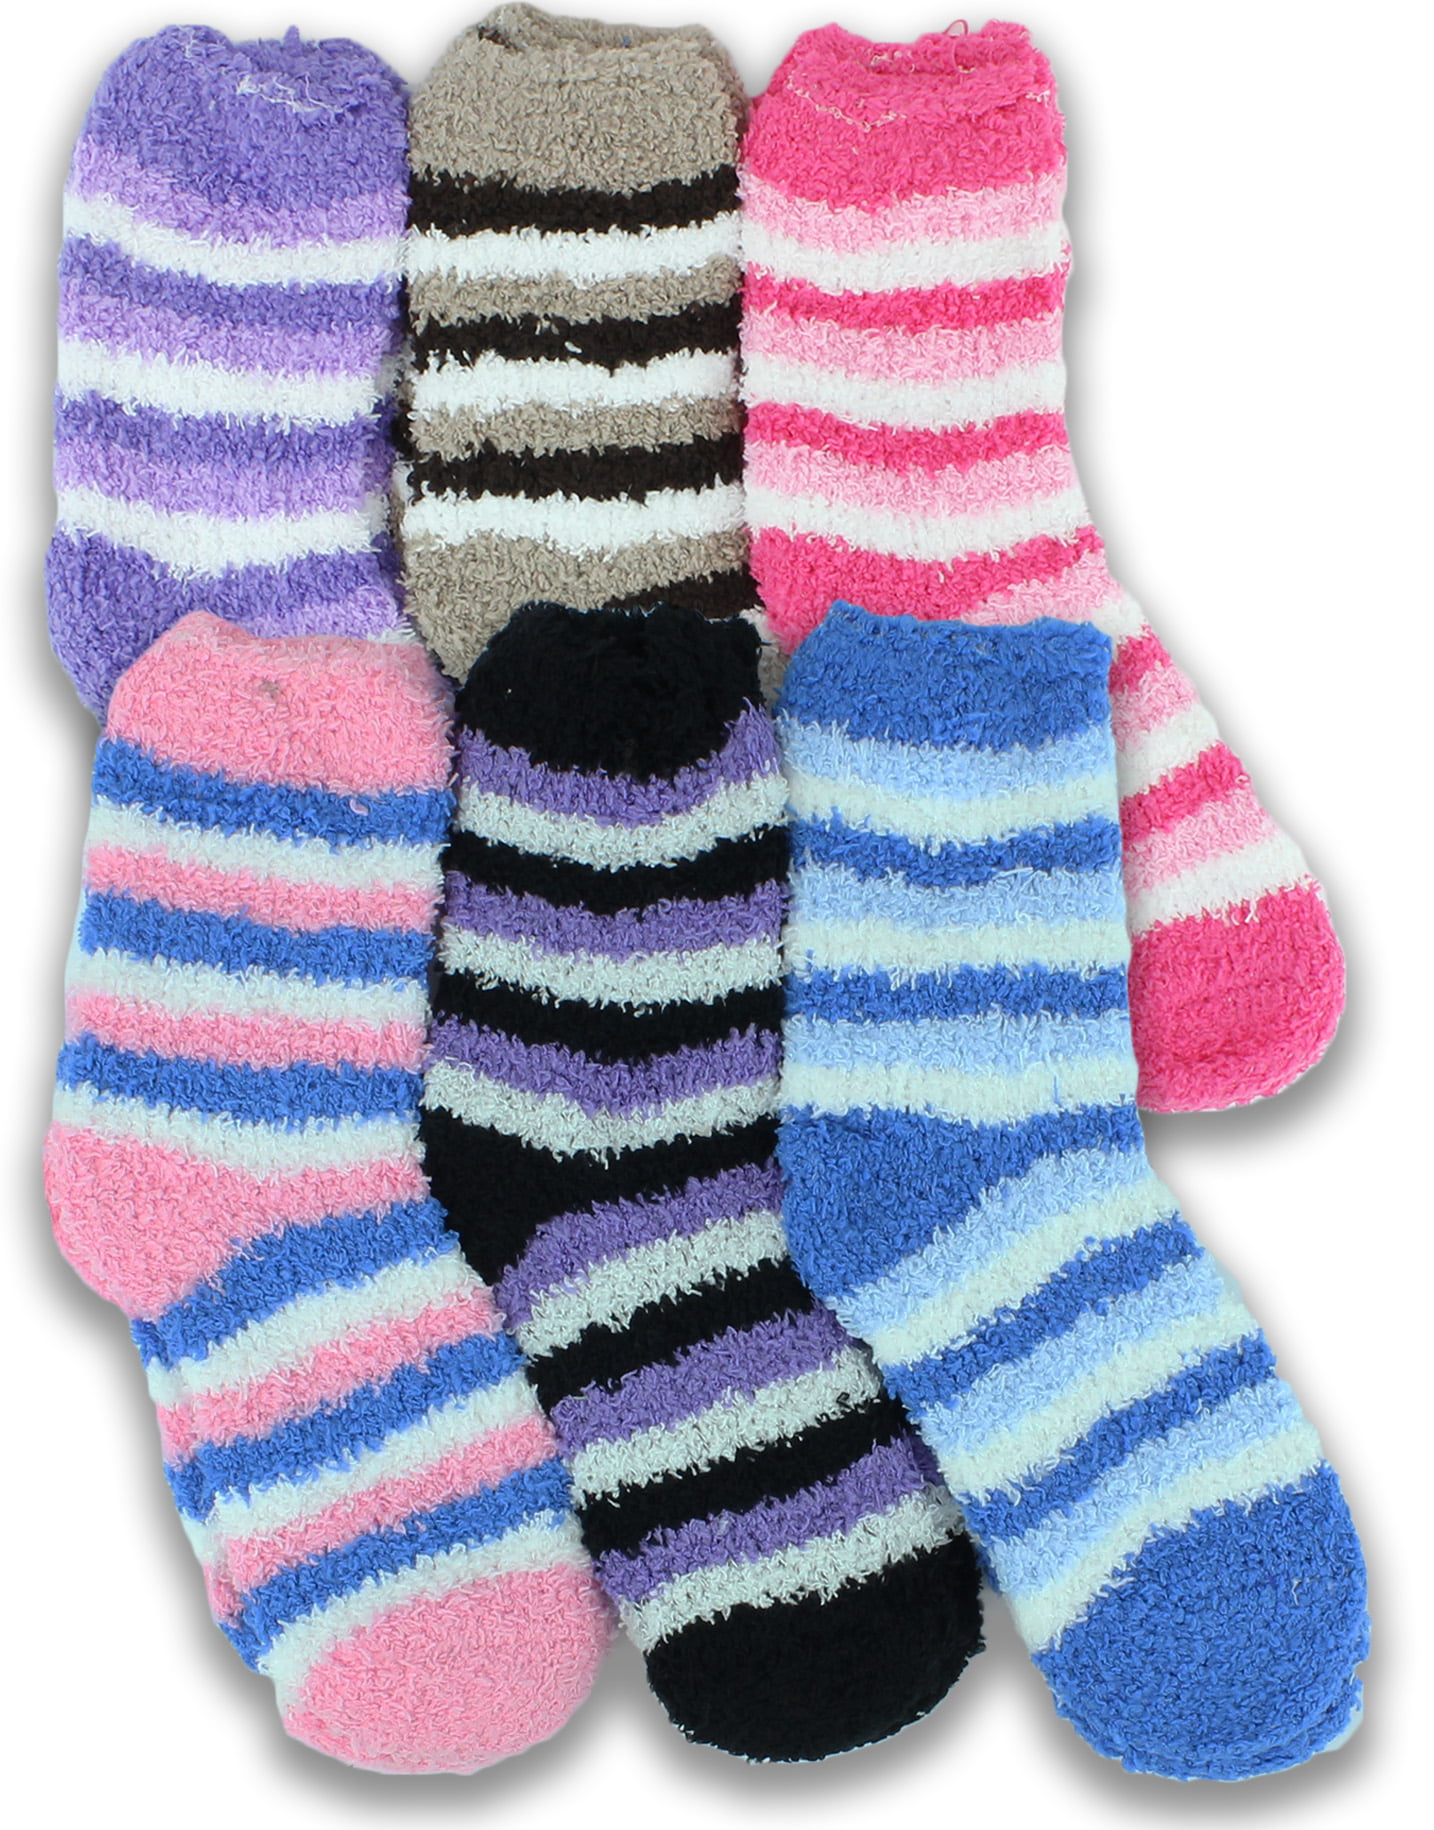 Kids Fuzzy Socks 6 Pack - Fits Ages 8-12 Colorful Striped Colors May ...